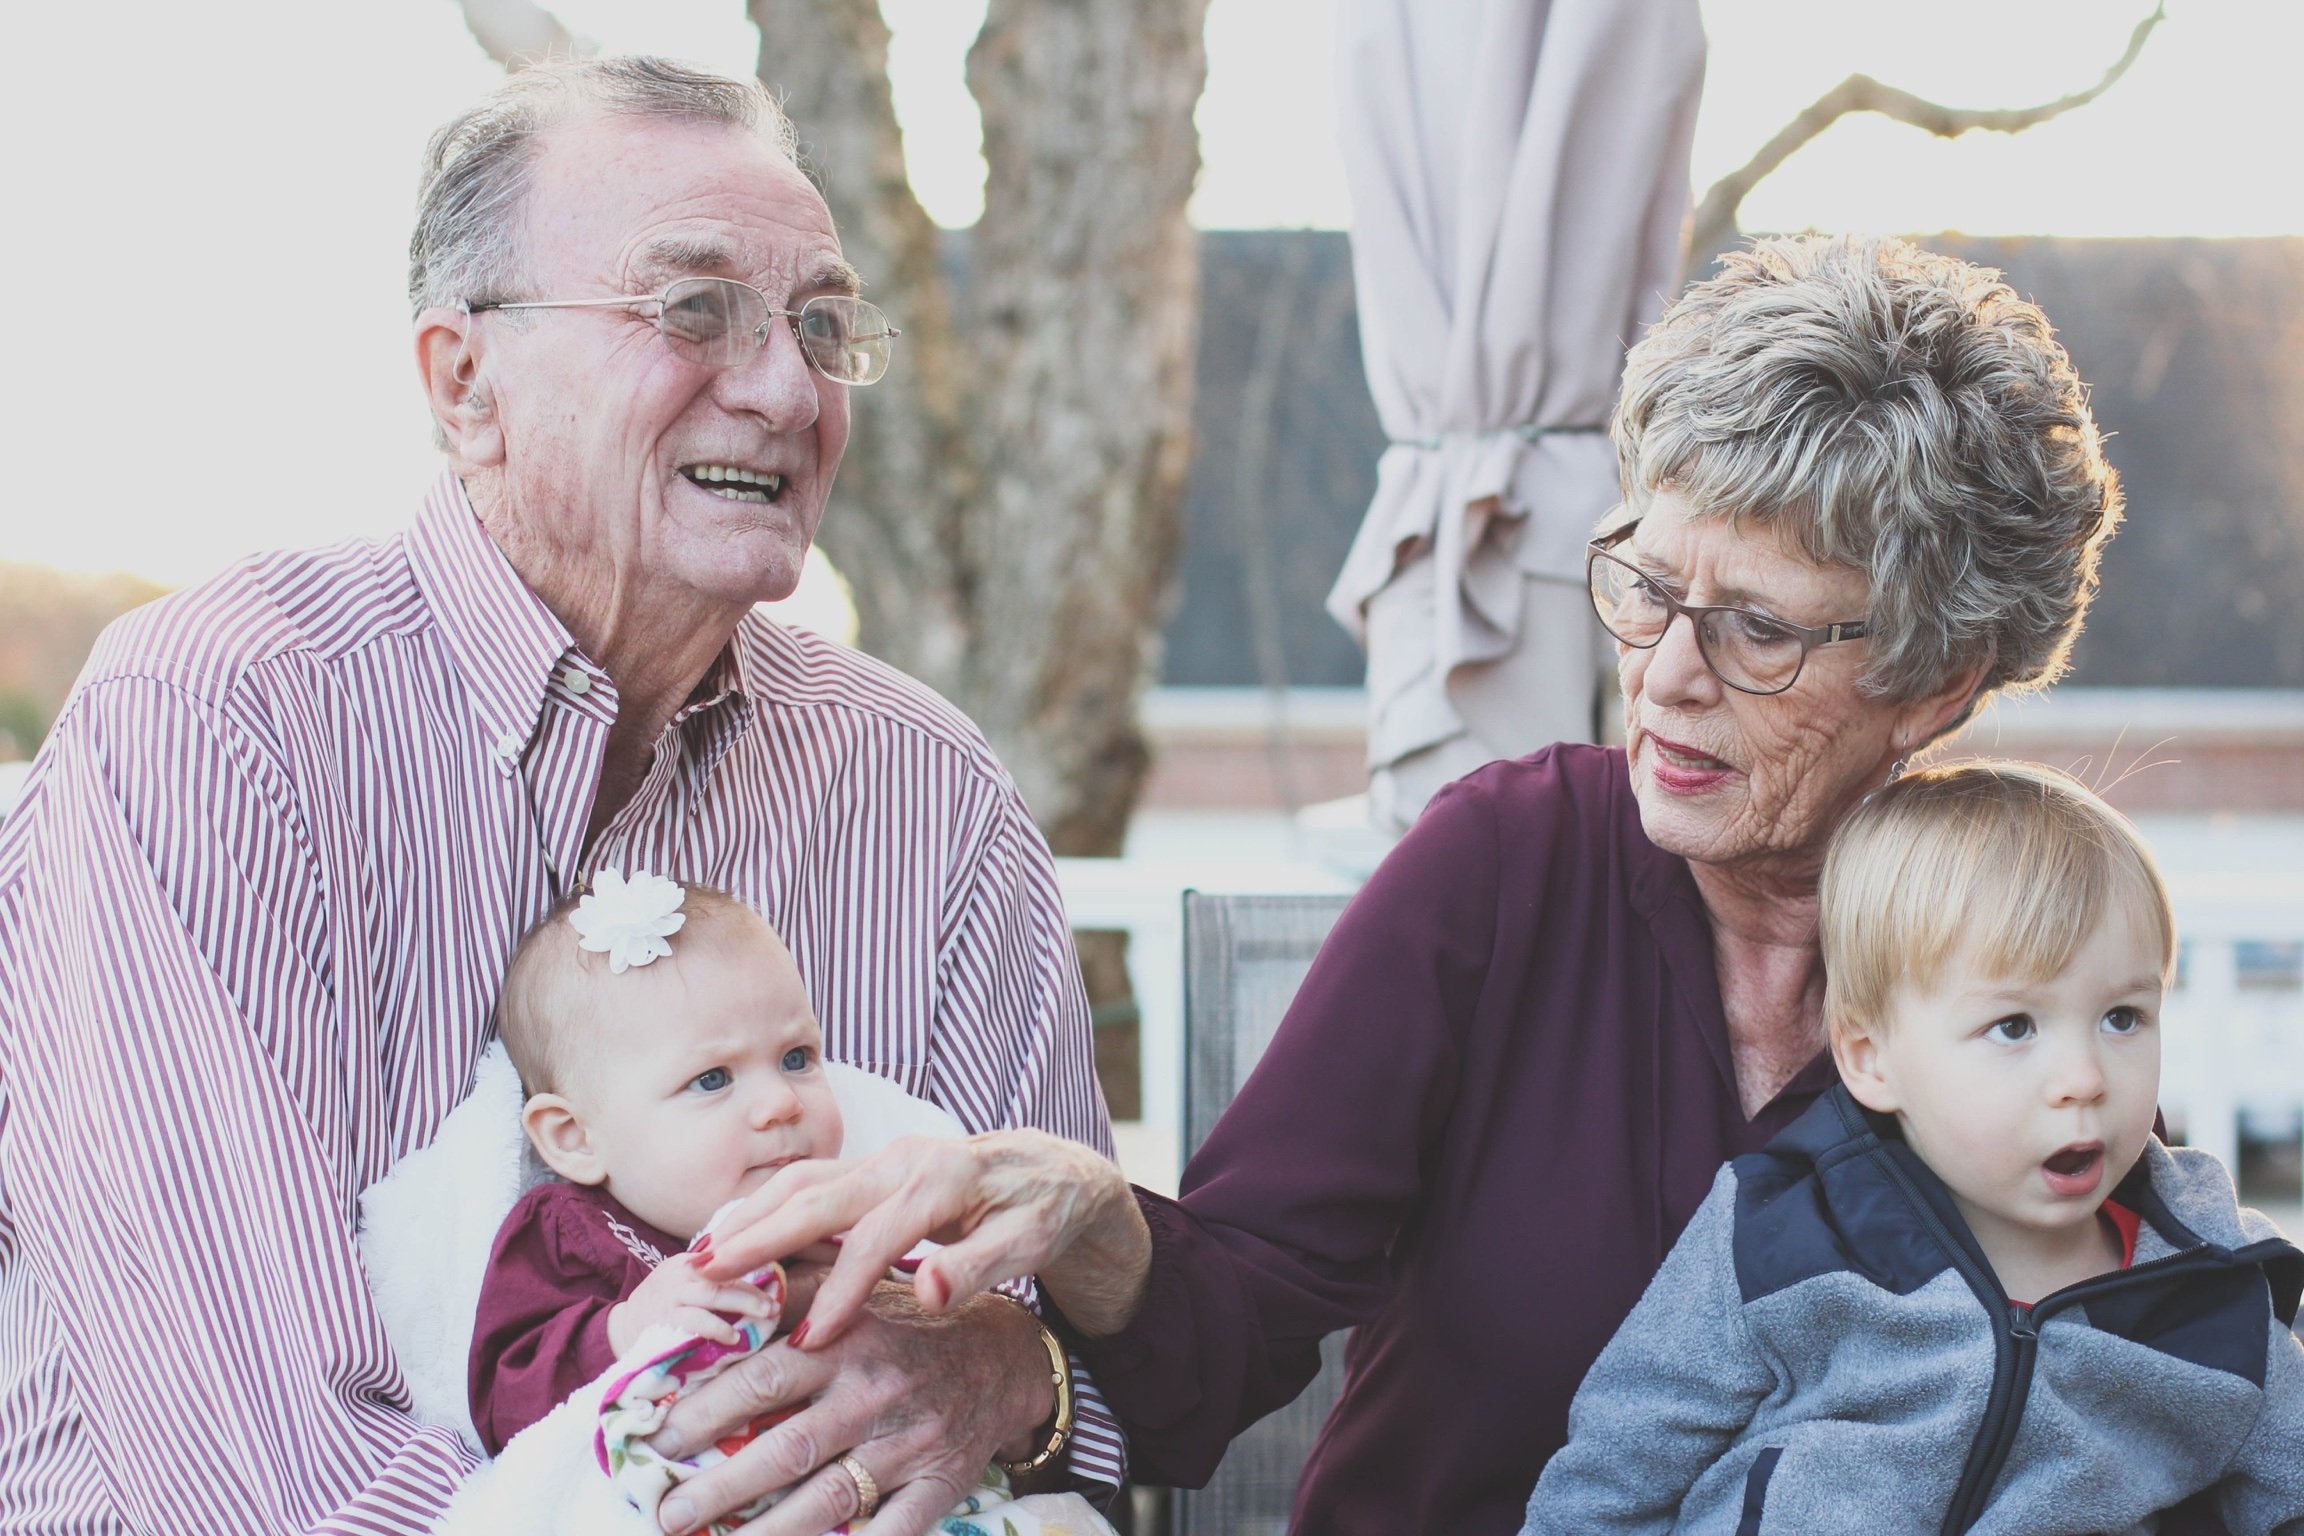 Couple with their young grandchildren | Source: Pexels